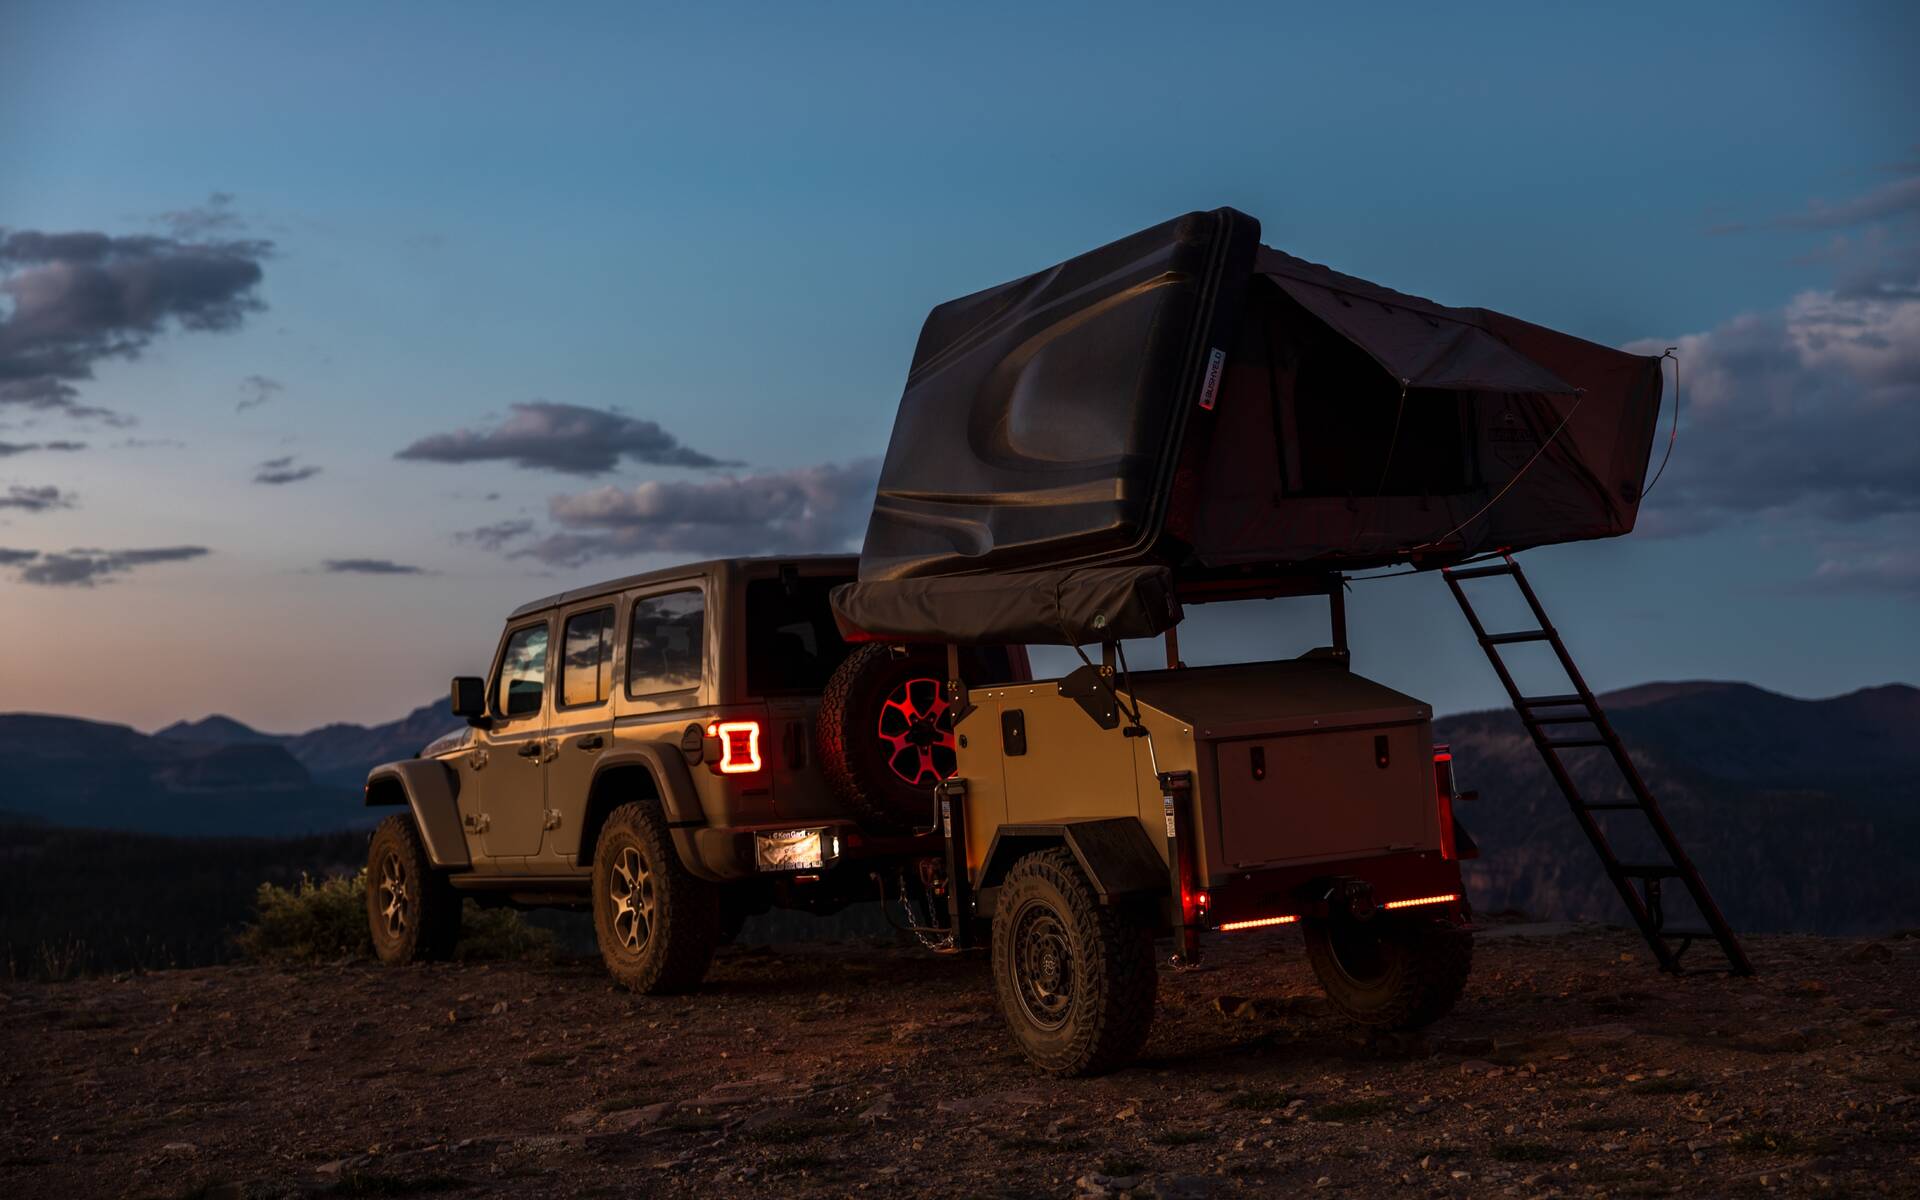 At Last There's a Trailer That Can Follow Your Jeep Wrangler Anywhere - The  Car Guide